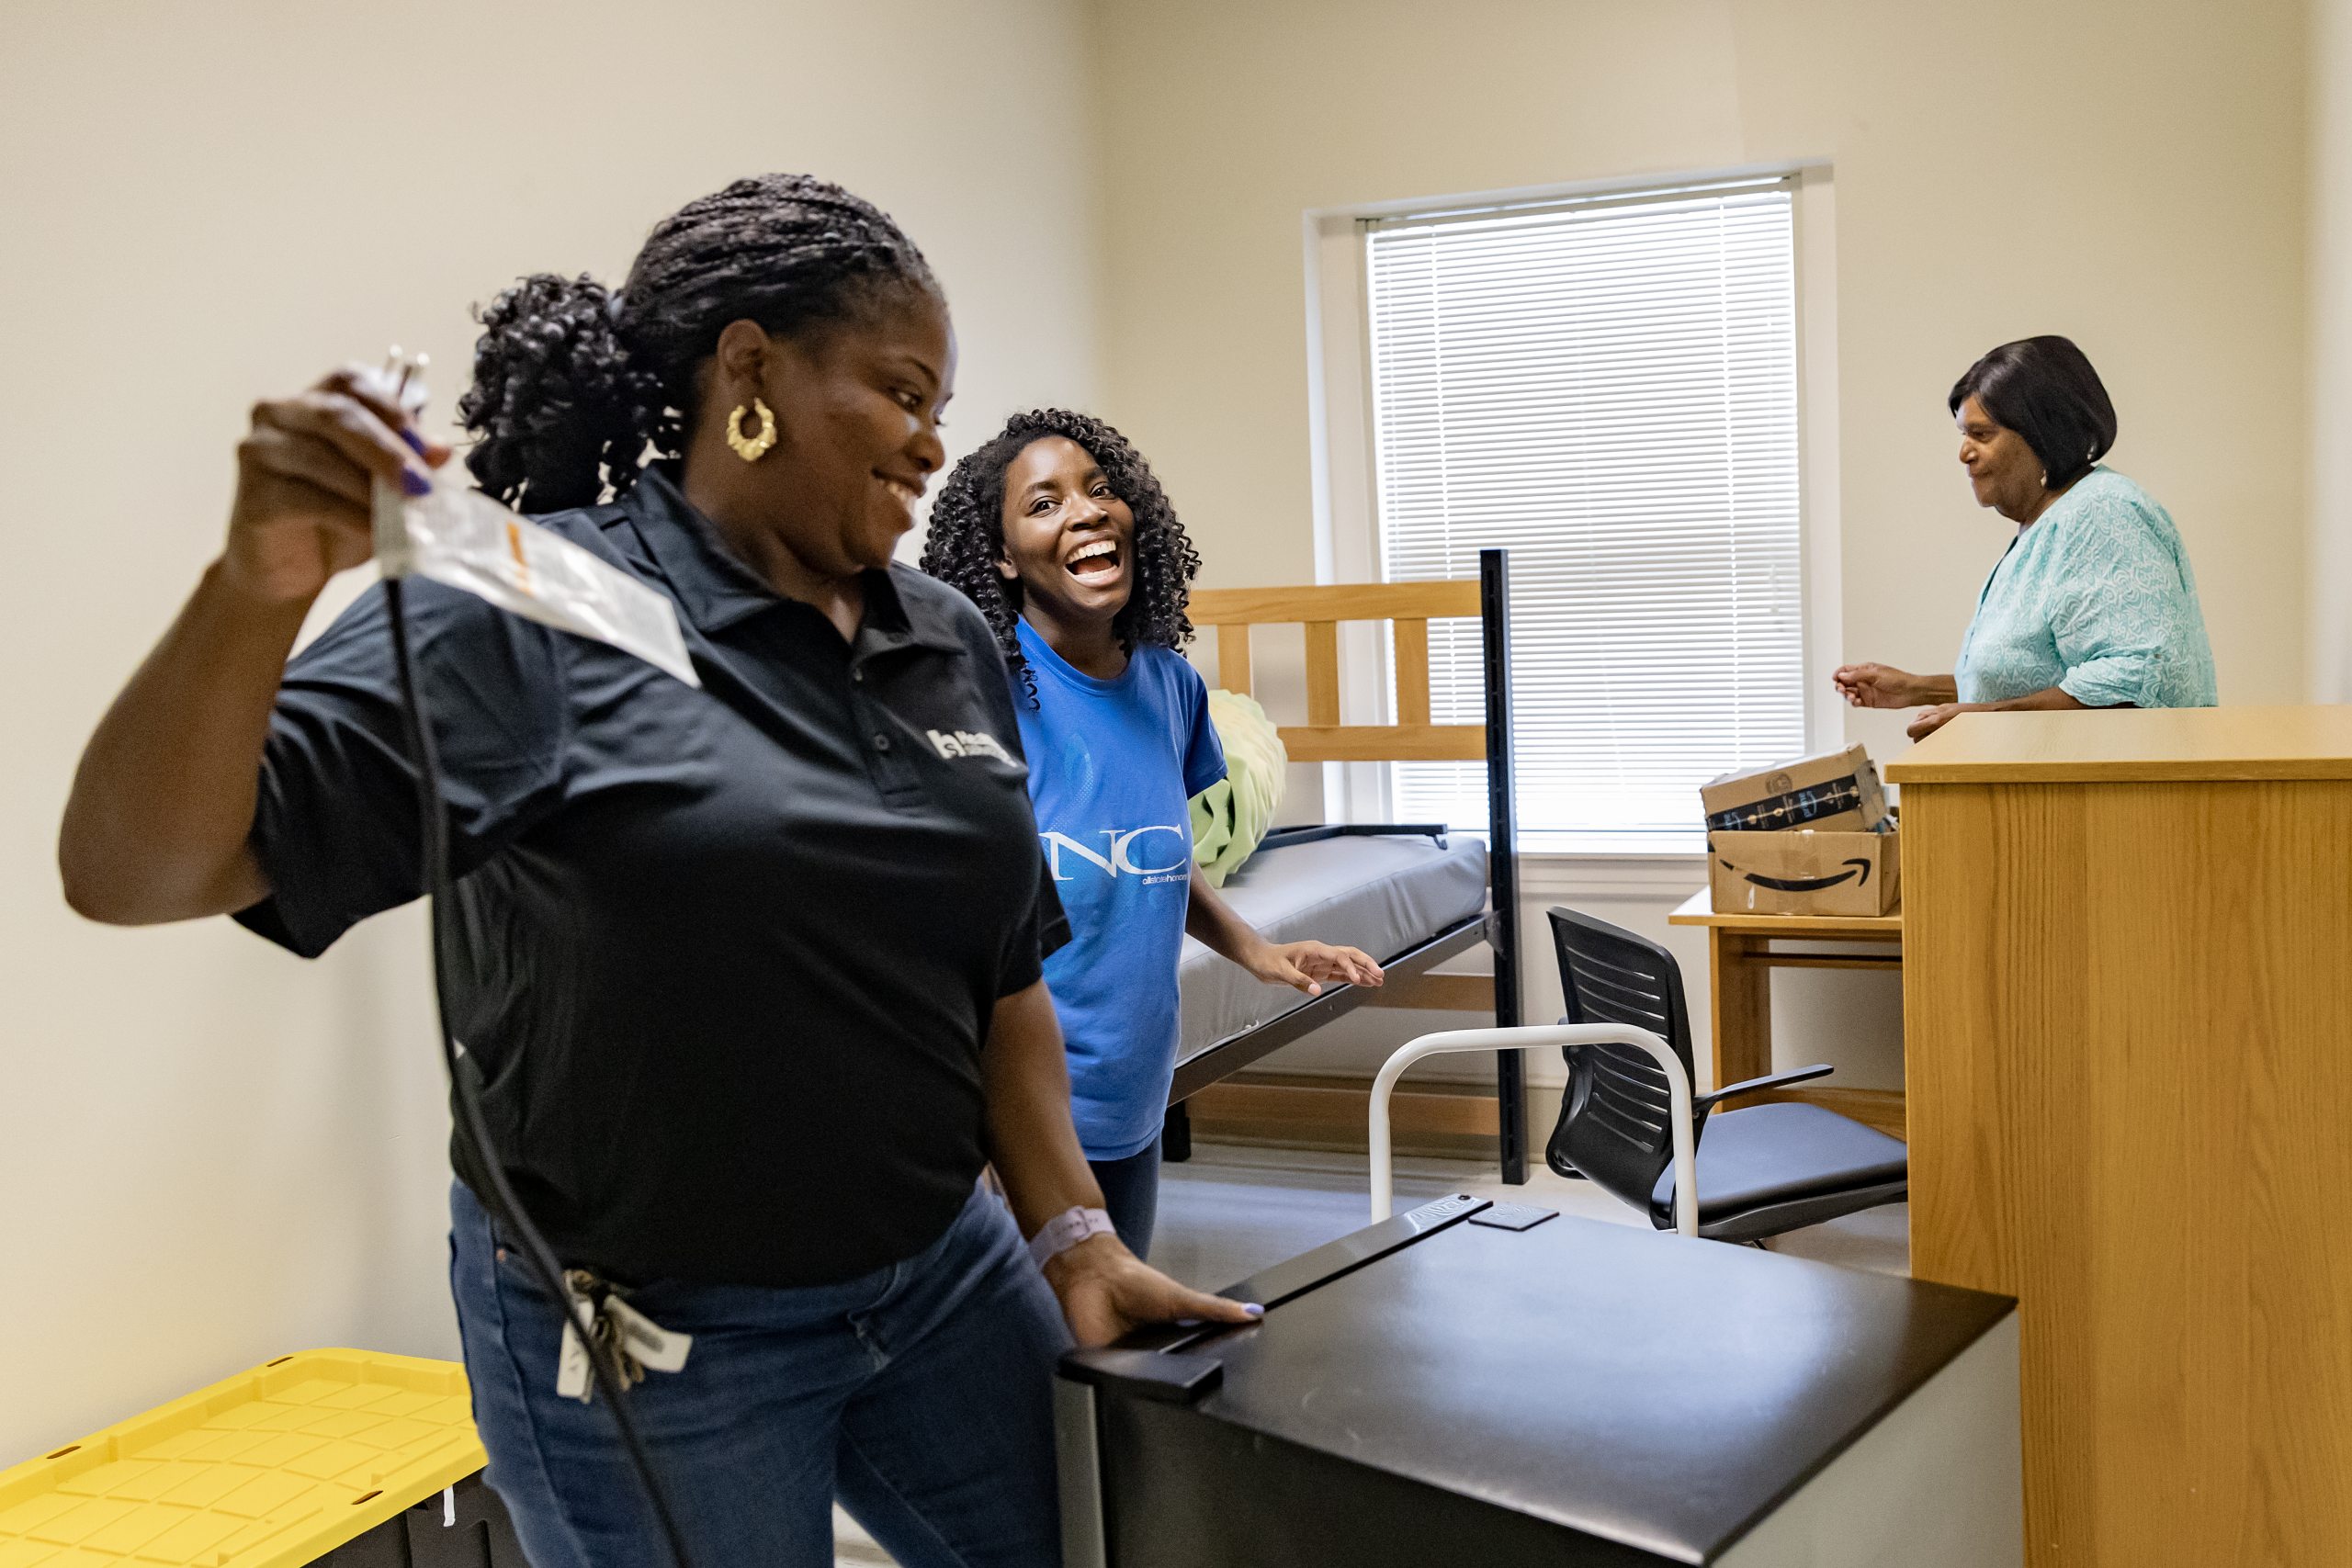 A student, her mother and grandmother smiling and laughing as they set up a dorm room.